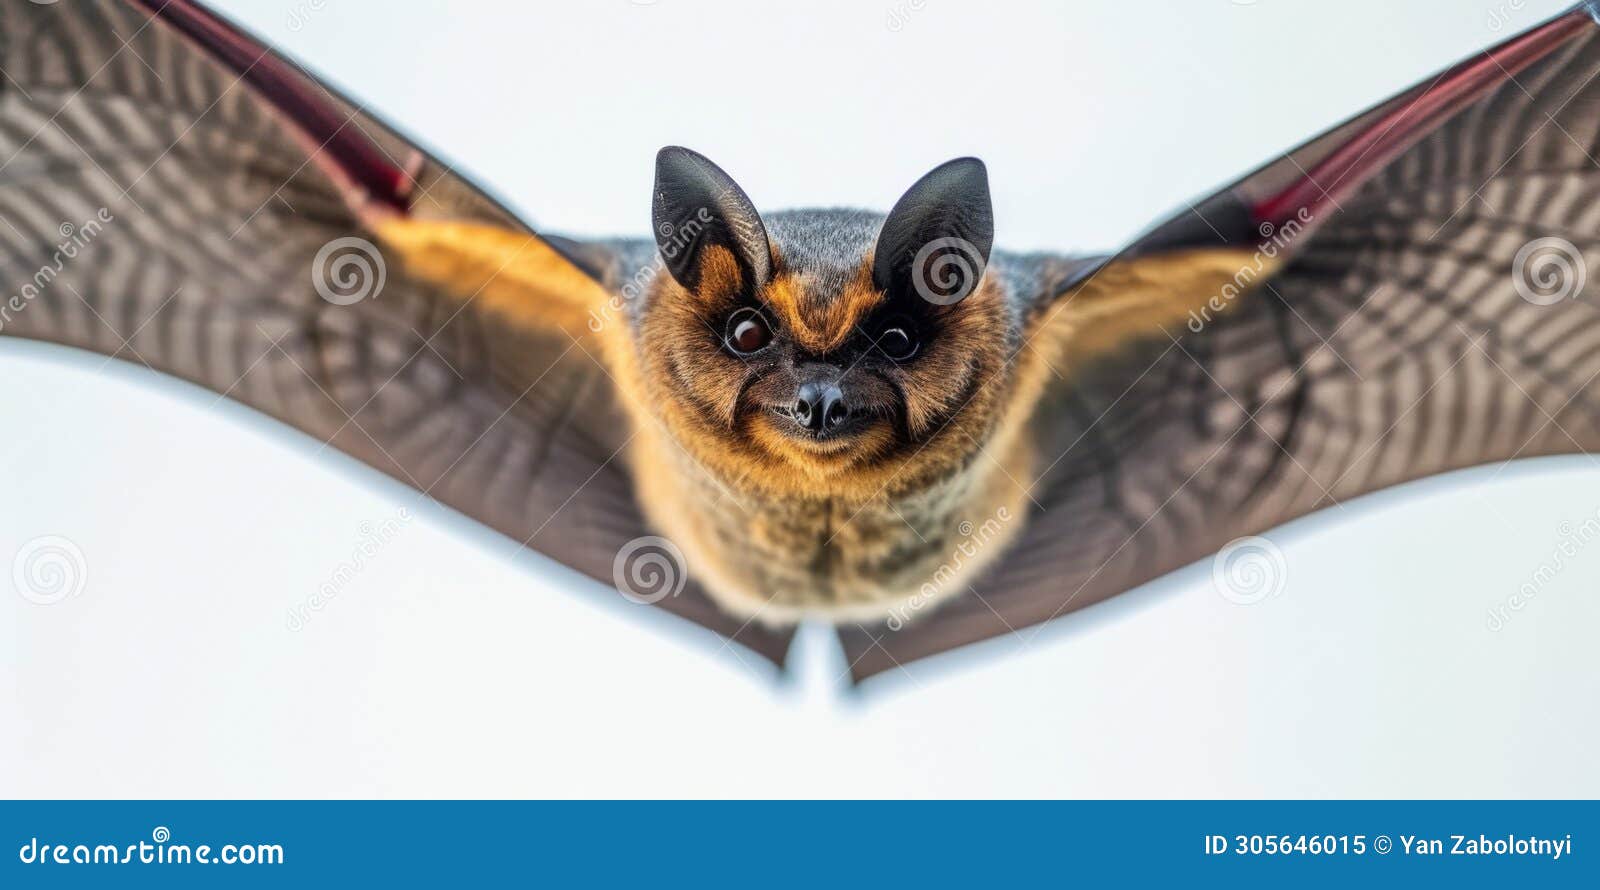 bat midflight with wings spread against a stark, white backdrop